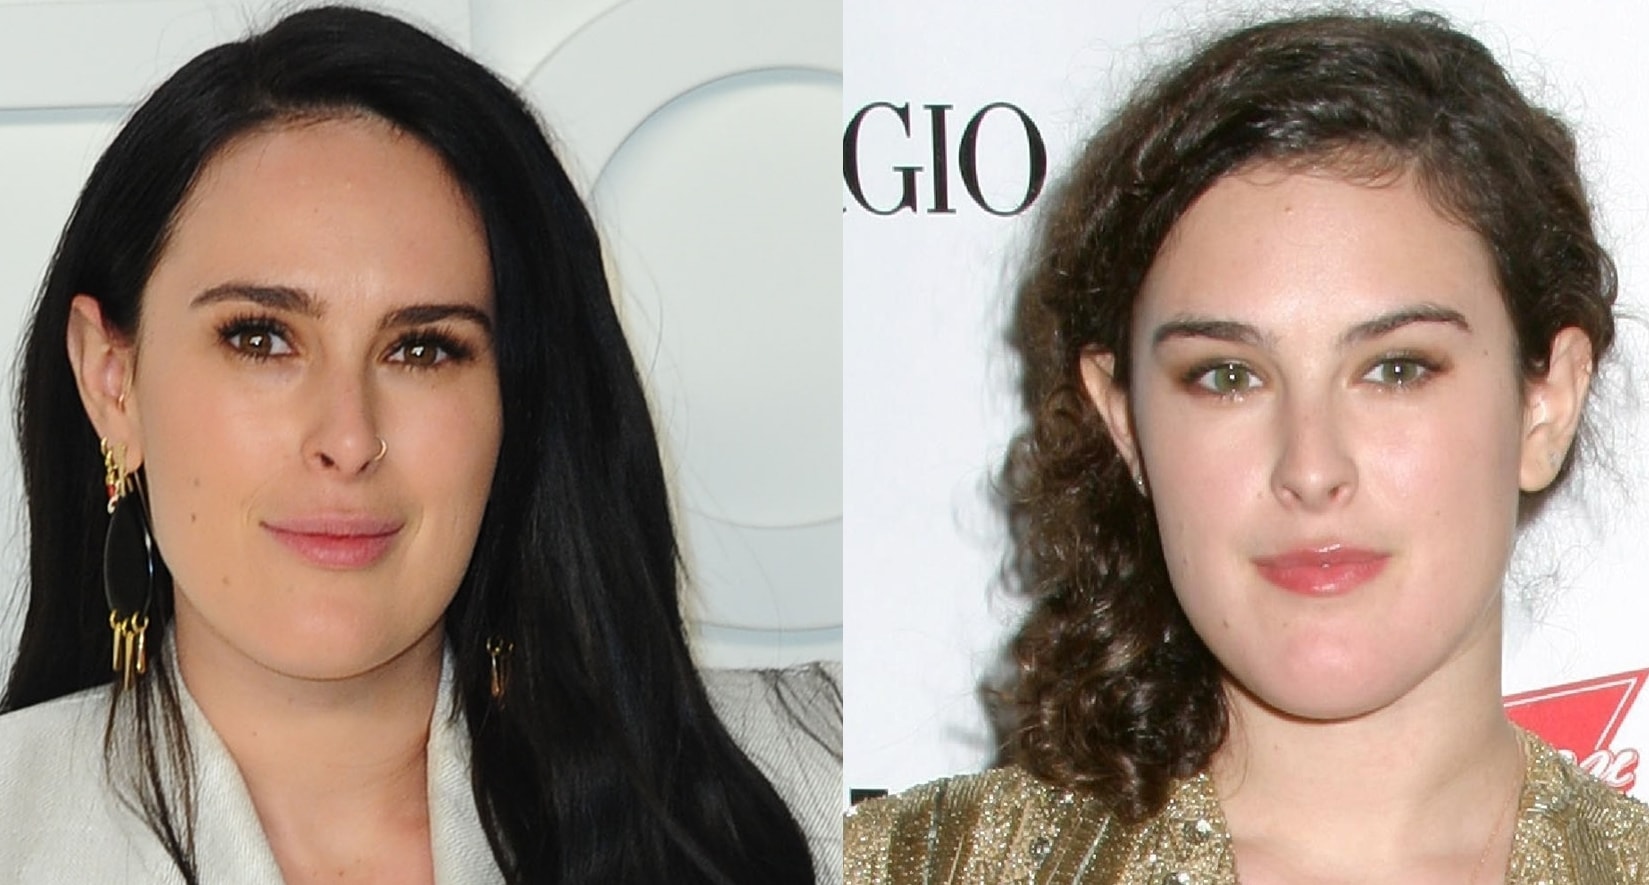 Chin before and after rumored plastic surgery: Rumer Willis in 2006 (R) and in 2020 (L)